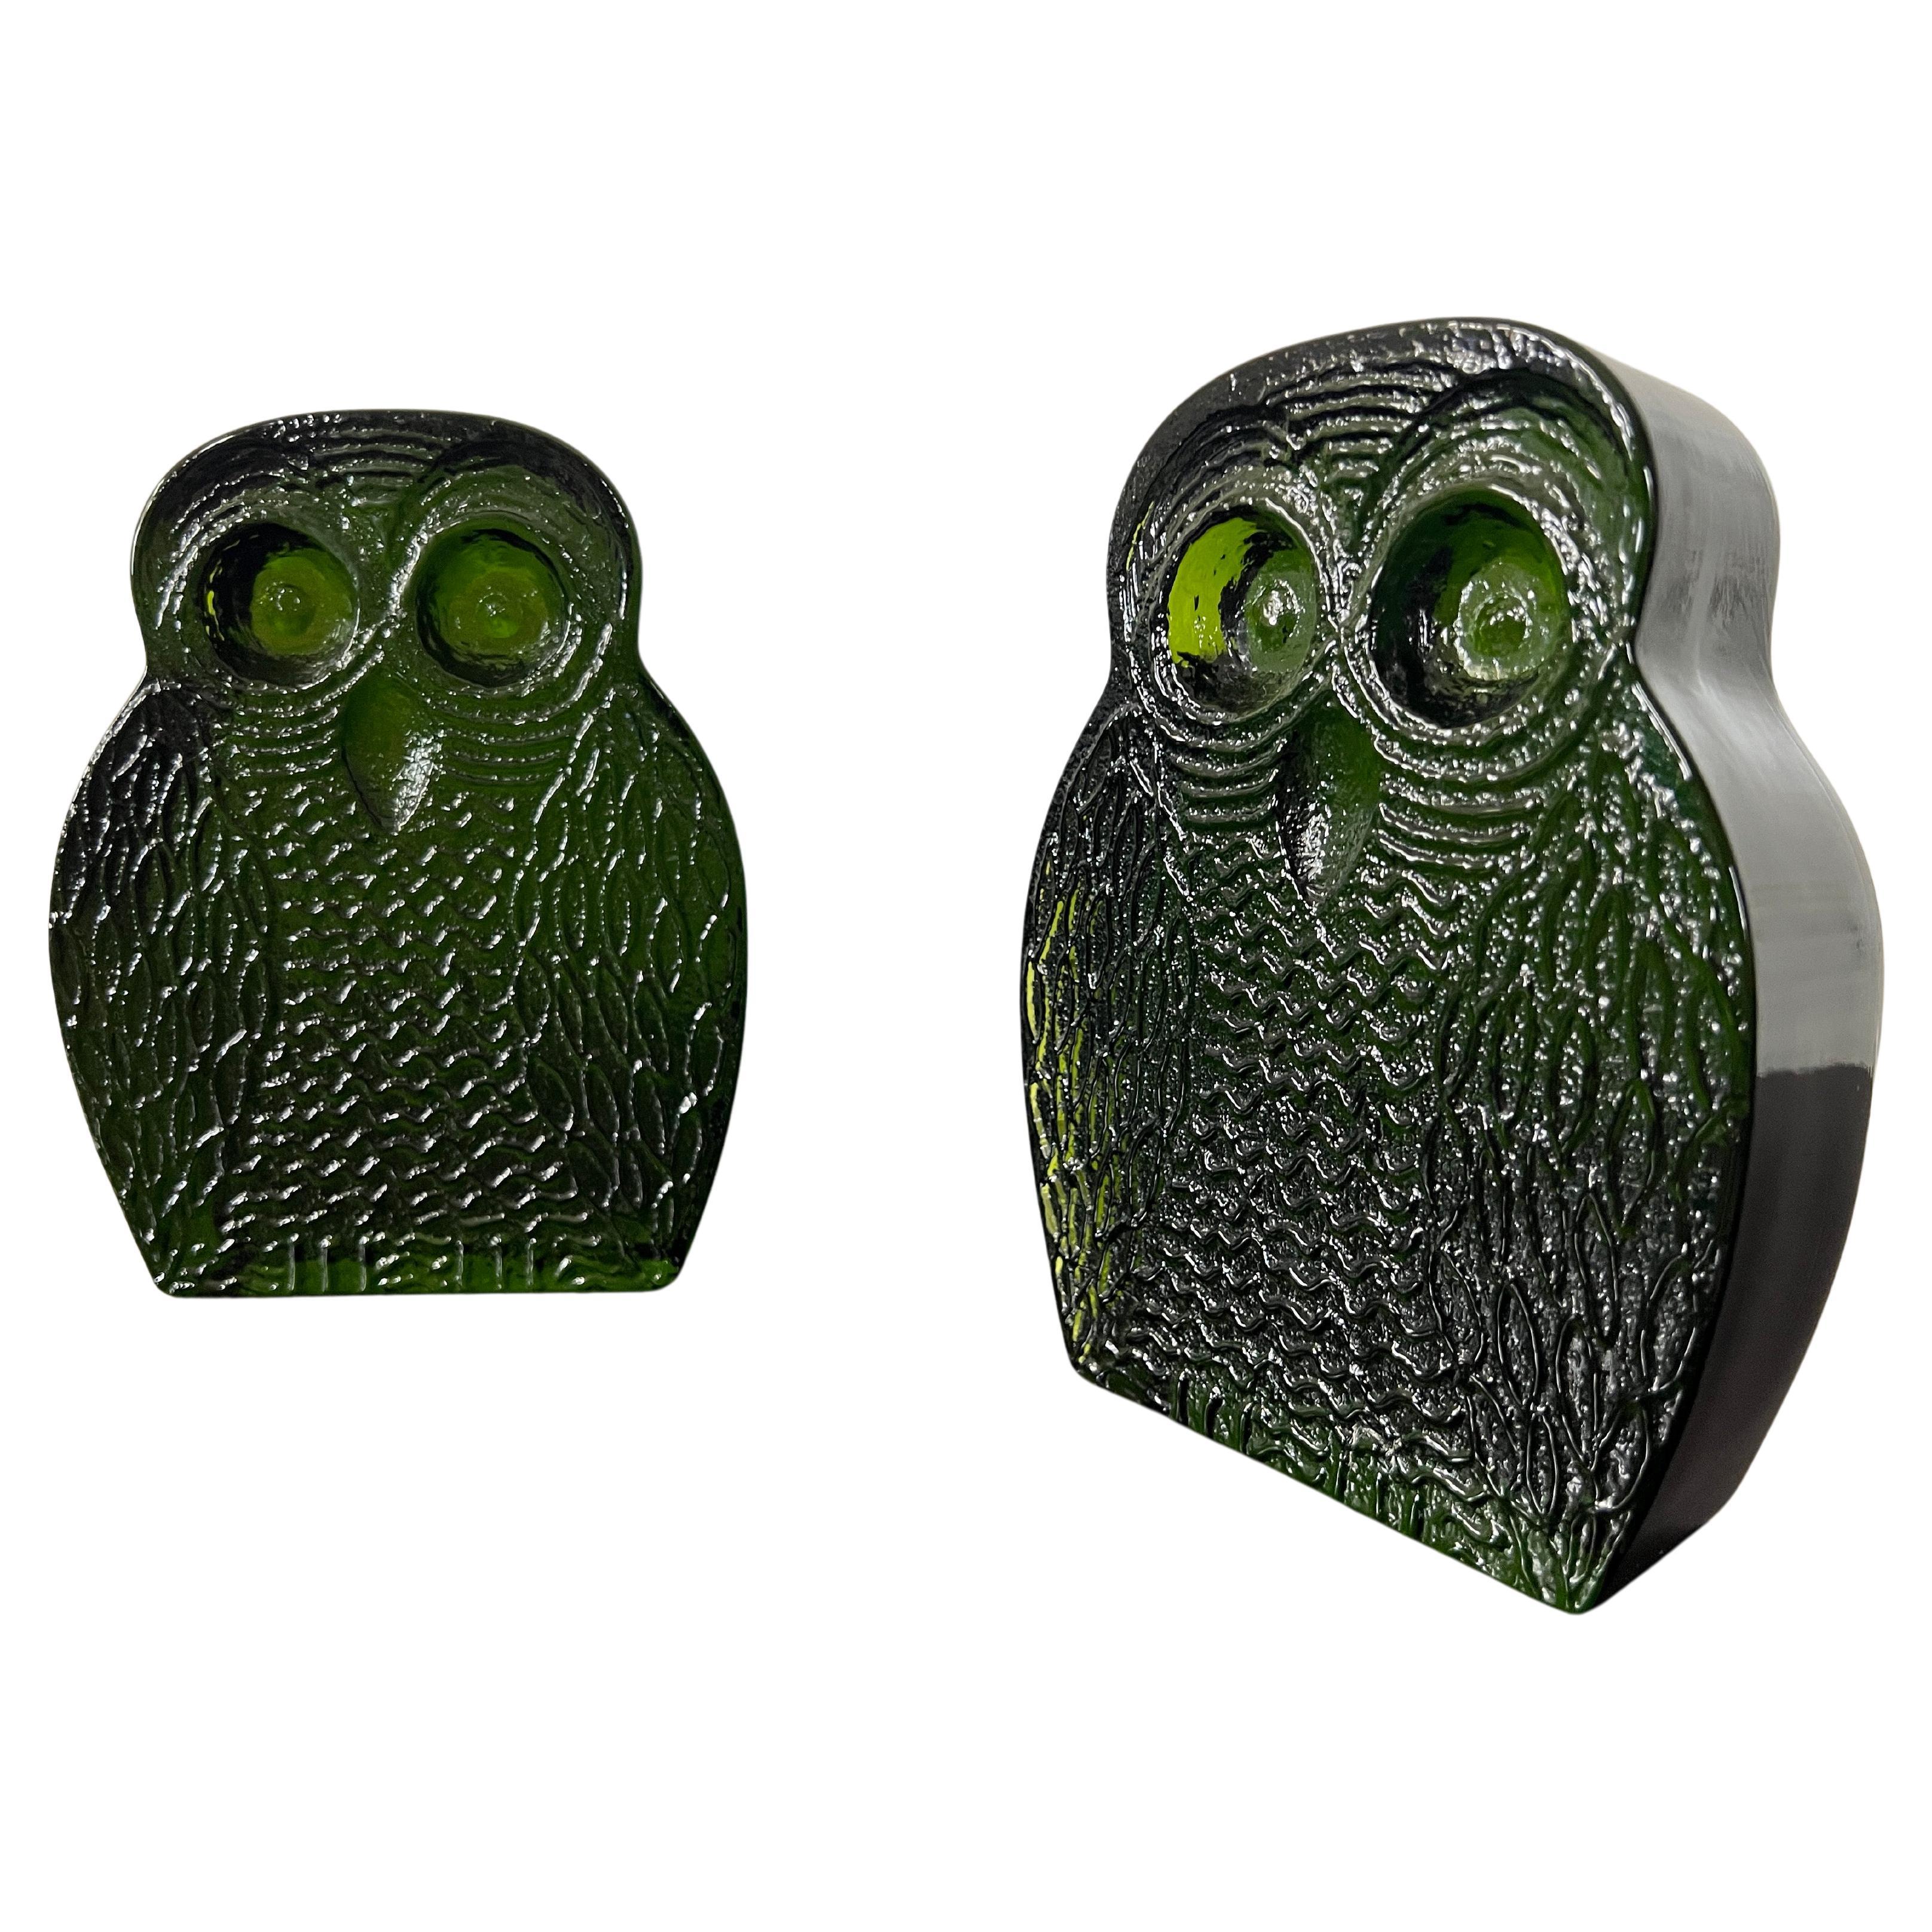 Blenko Glass Owl Book Ends  For Sale